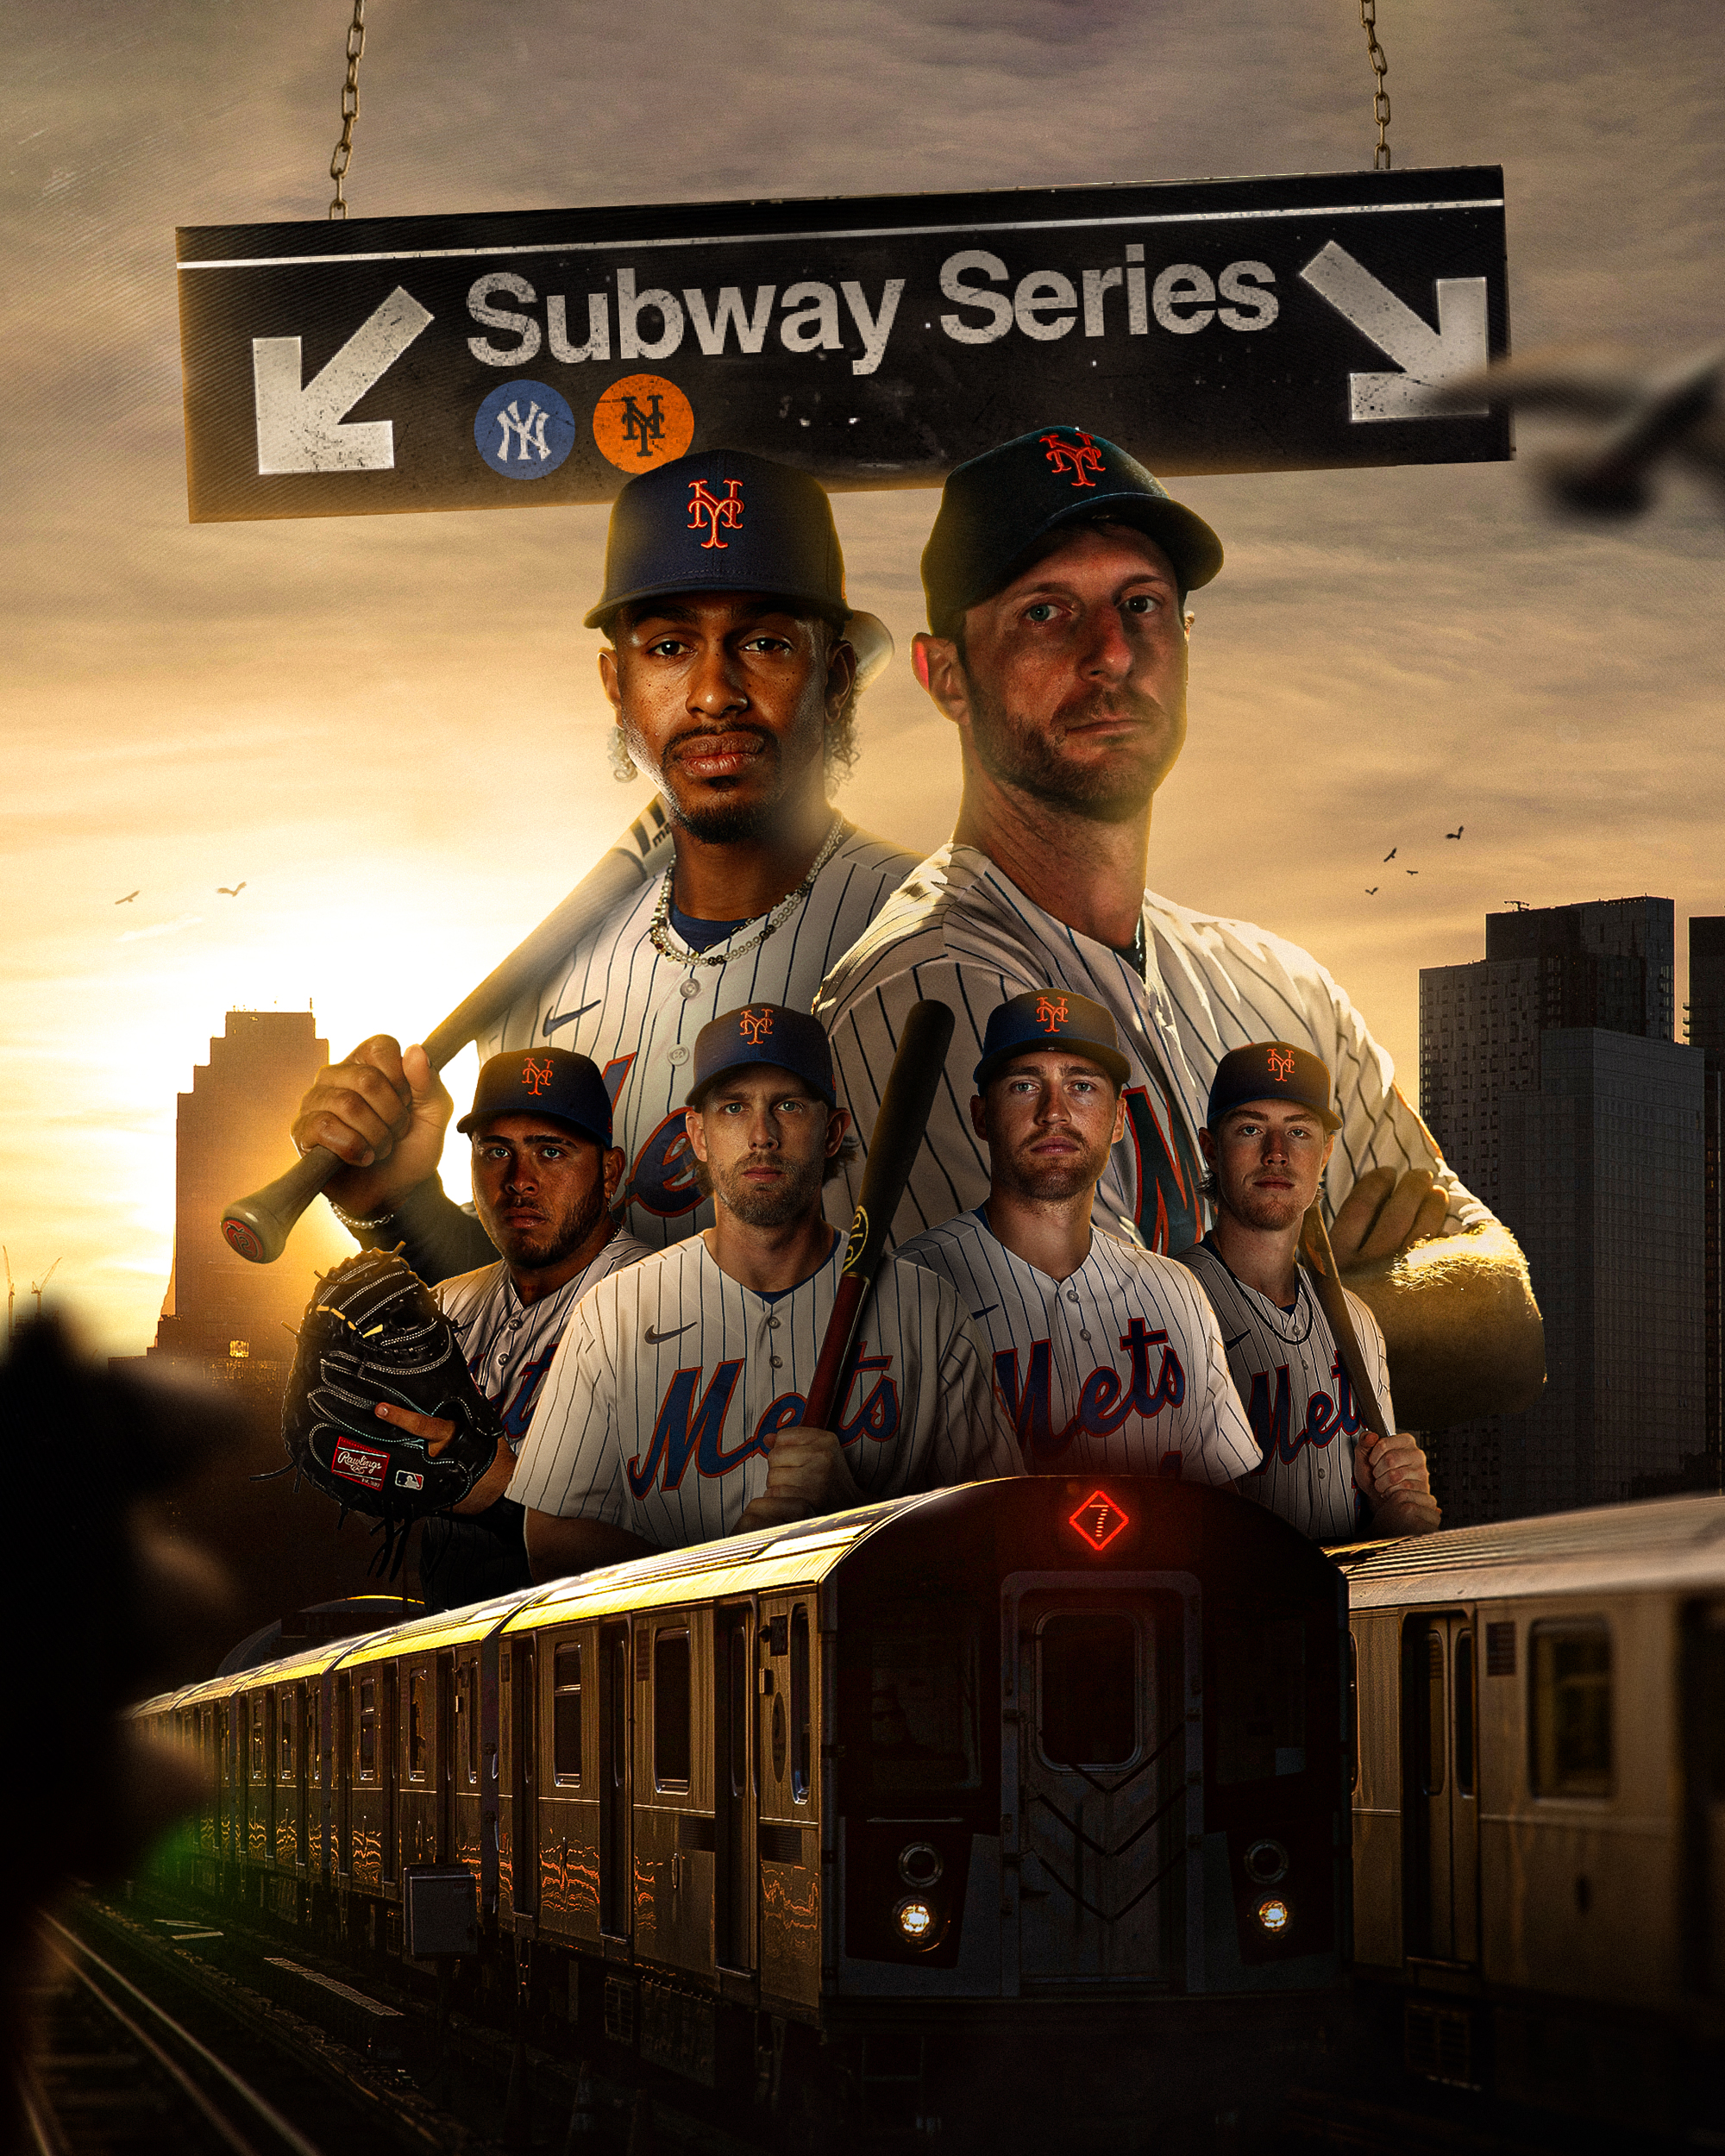 New York Mets on X: Next stop: Subway Series. 🚇 #LGM